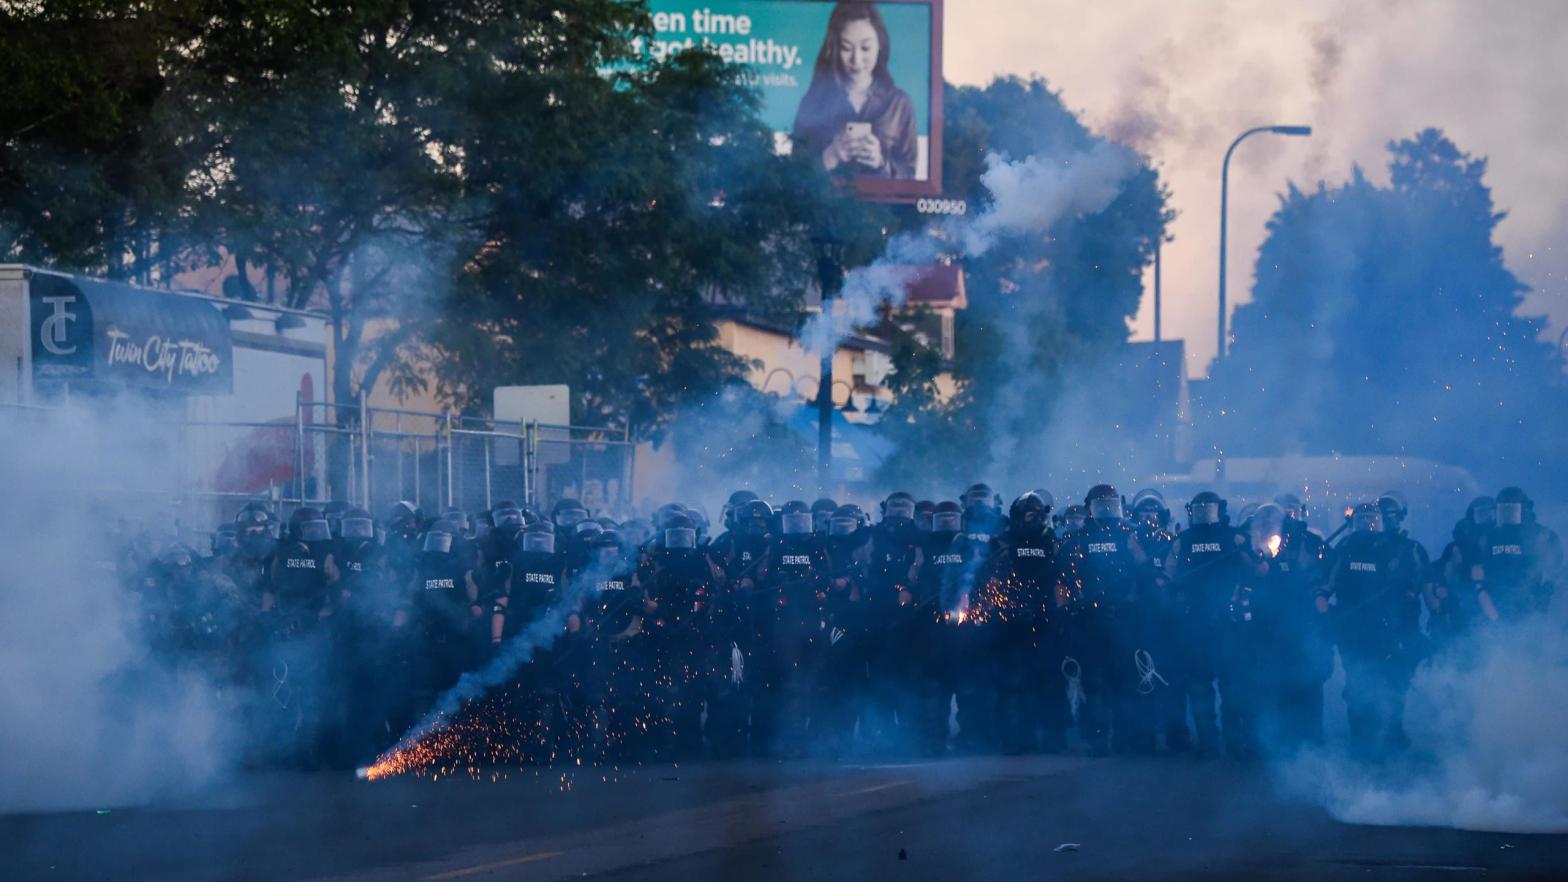 Police launch tear gas and fire rubber bullets toward protesters and the media near near the 5th police precinct during a demonstration to call for justice for George Floyd on May 30 in Minneapolis, Minn. (Photo: Chandan Khanna/AFP, Getty Images)